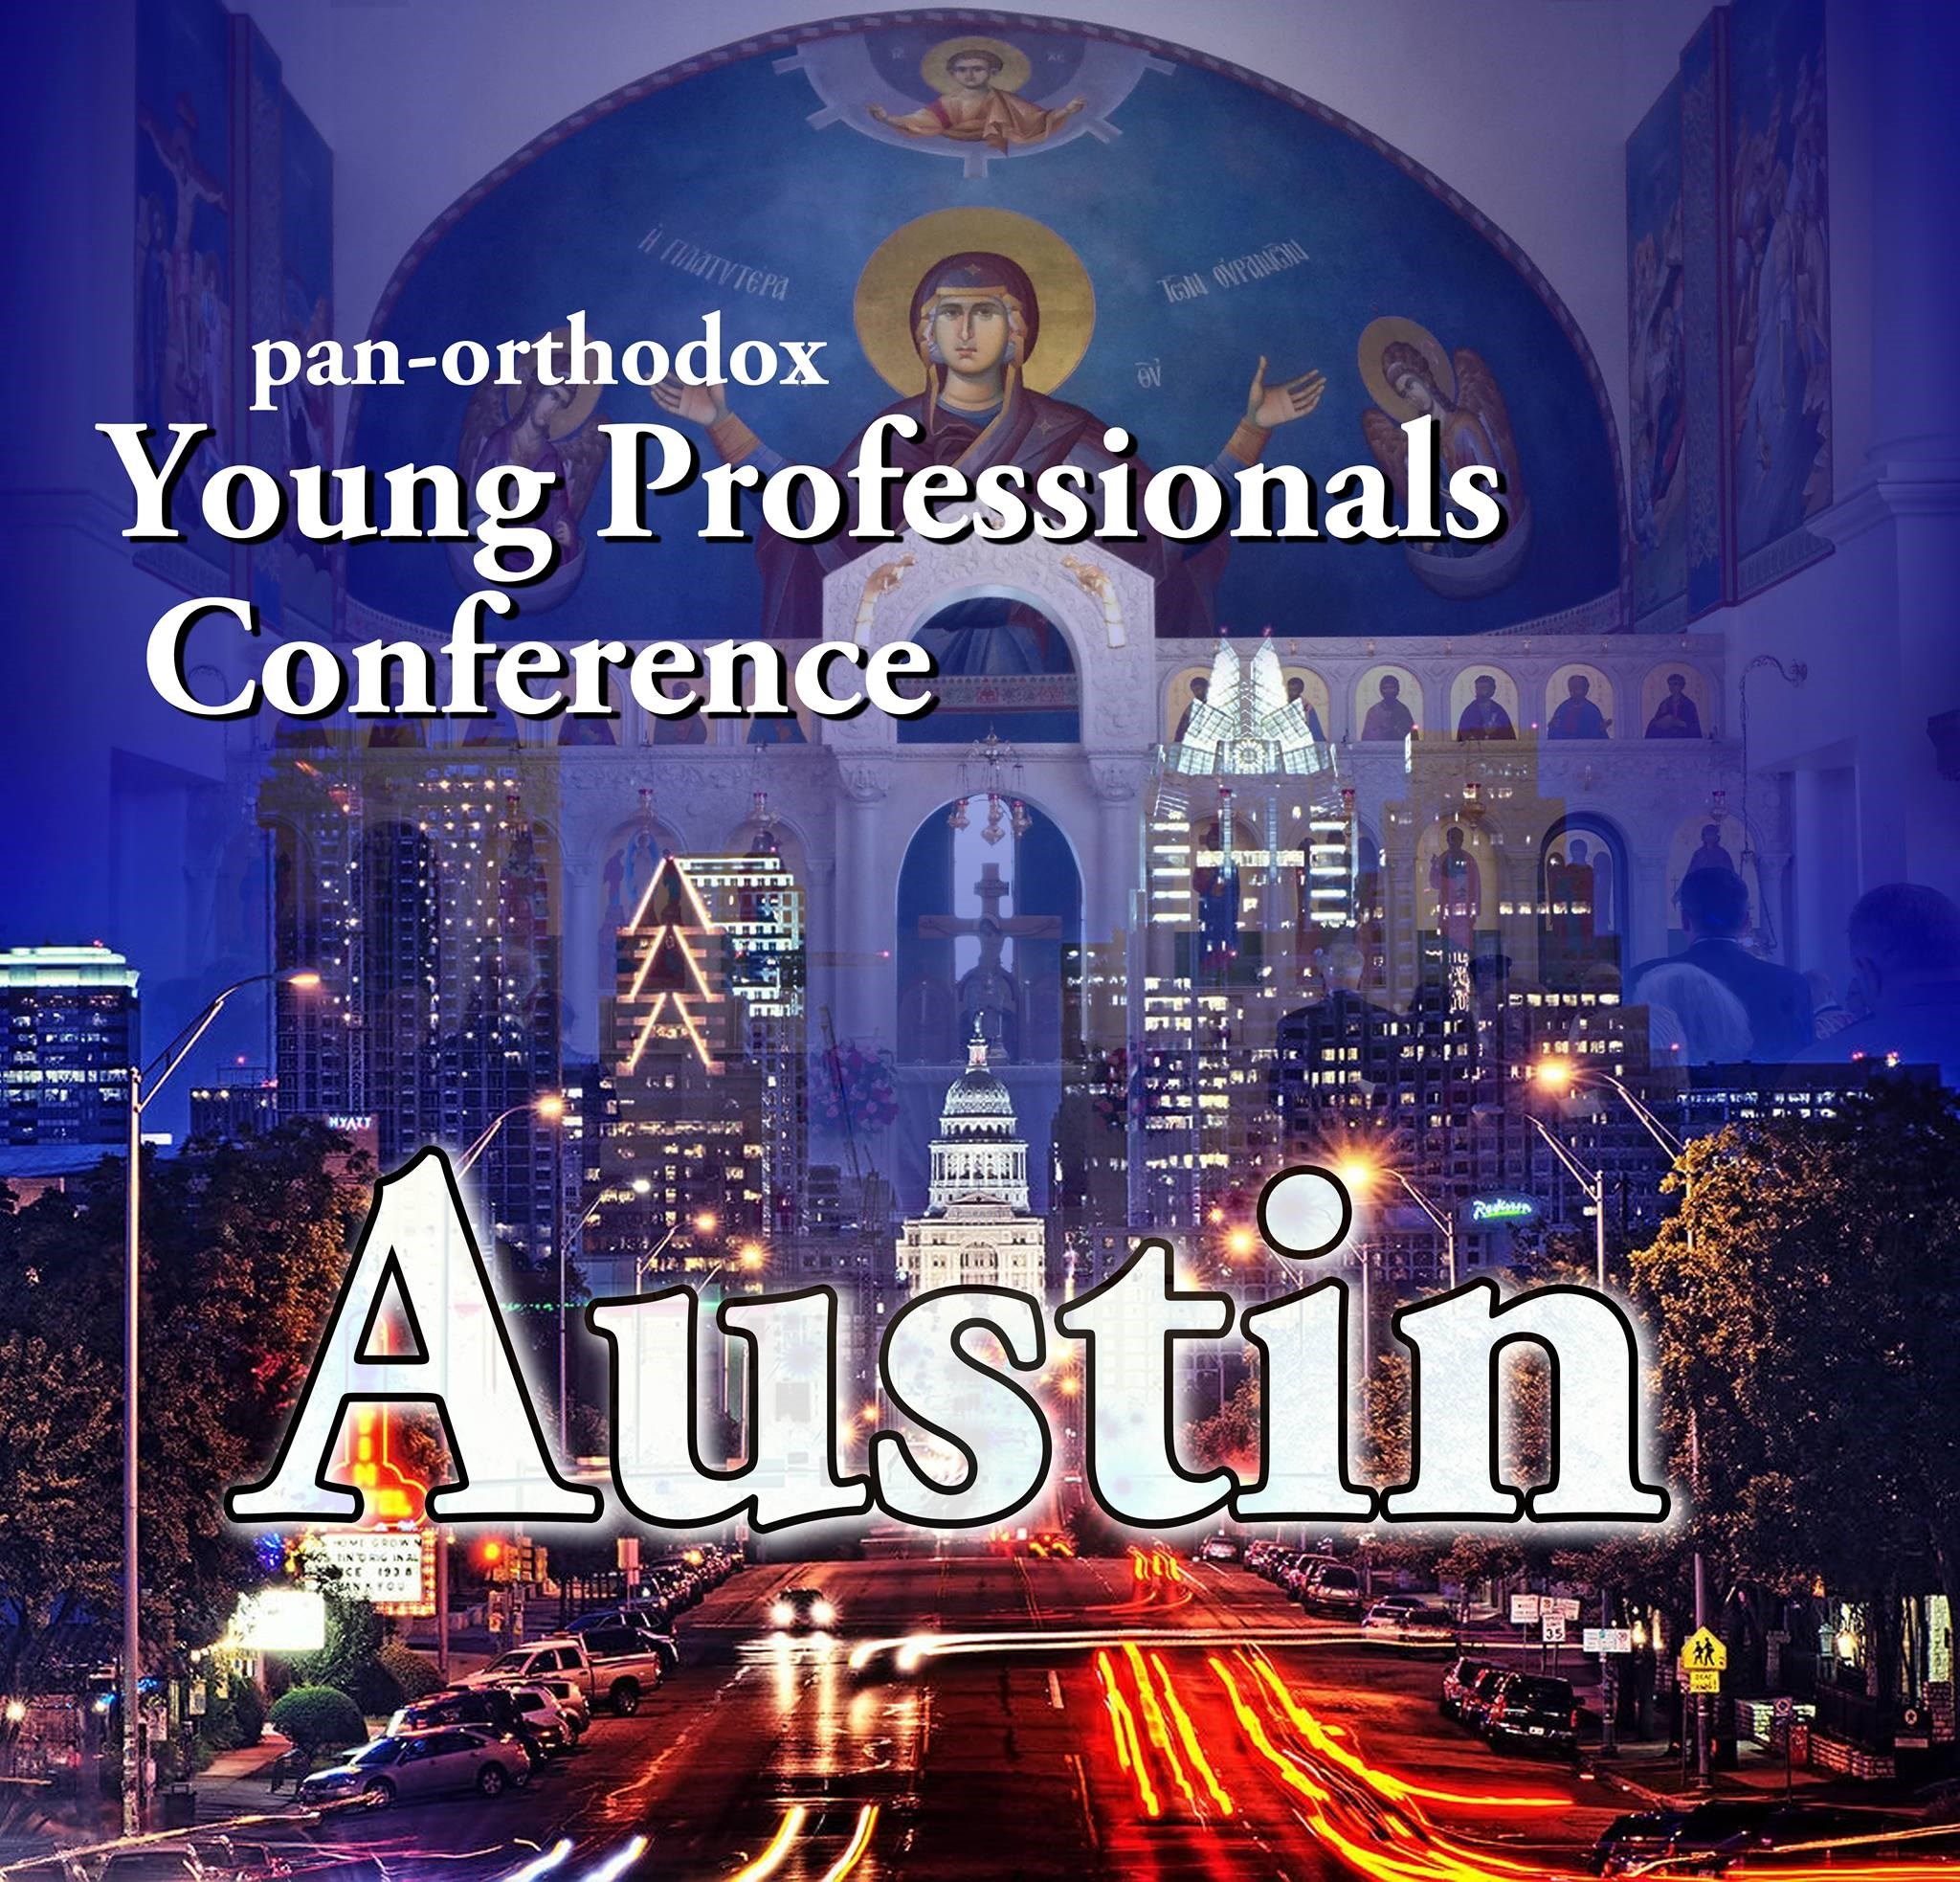 WEEKLY ANNOUNCEMENTS continued: Sunday, September 7, 2014 The Young Adults of Austin are thrilled to be hosting Austin's first pan-orthodox Young Professionals Conference!